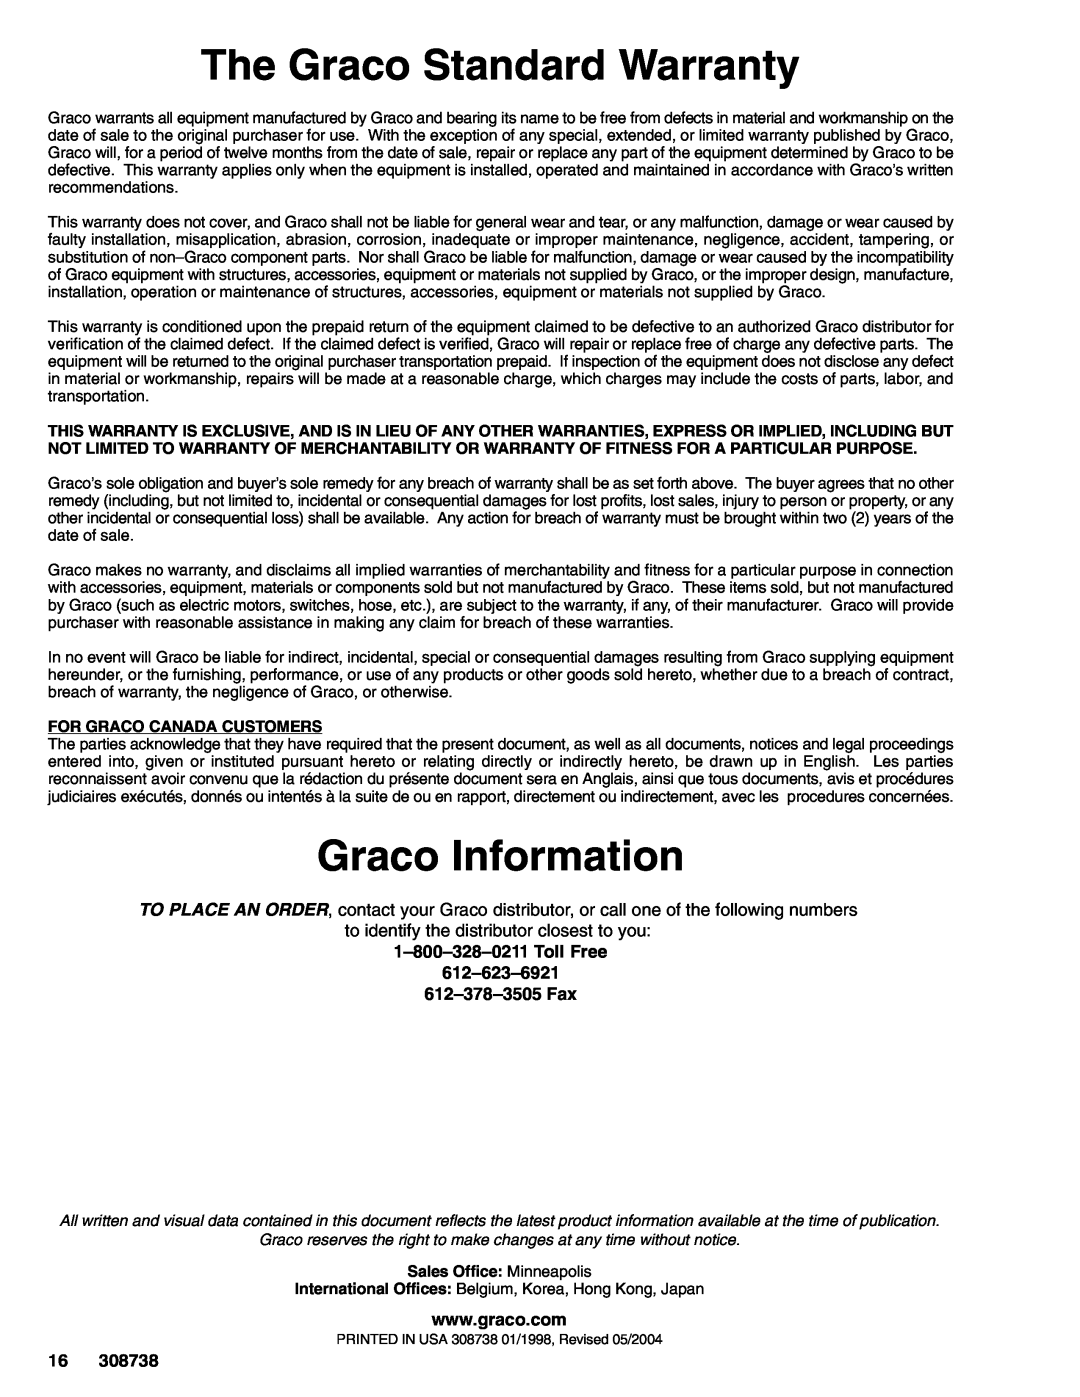 Graco 308738C manual The Graco Standard Warranty, Graco Information, For Graco Canada Customers, Sales Office Minneapolis 